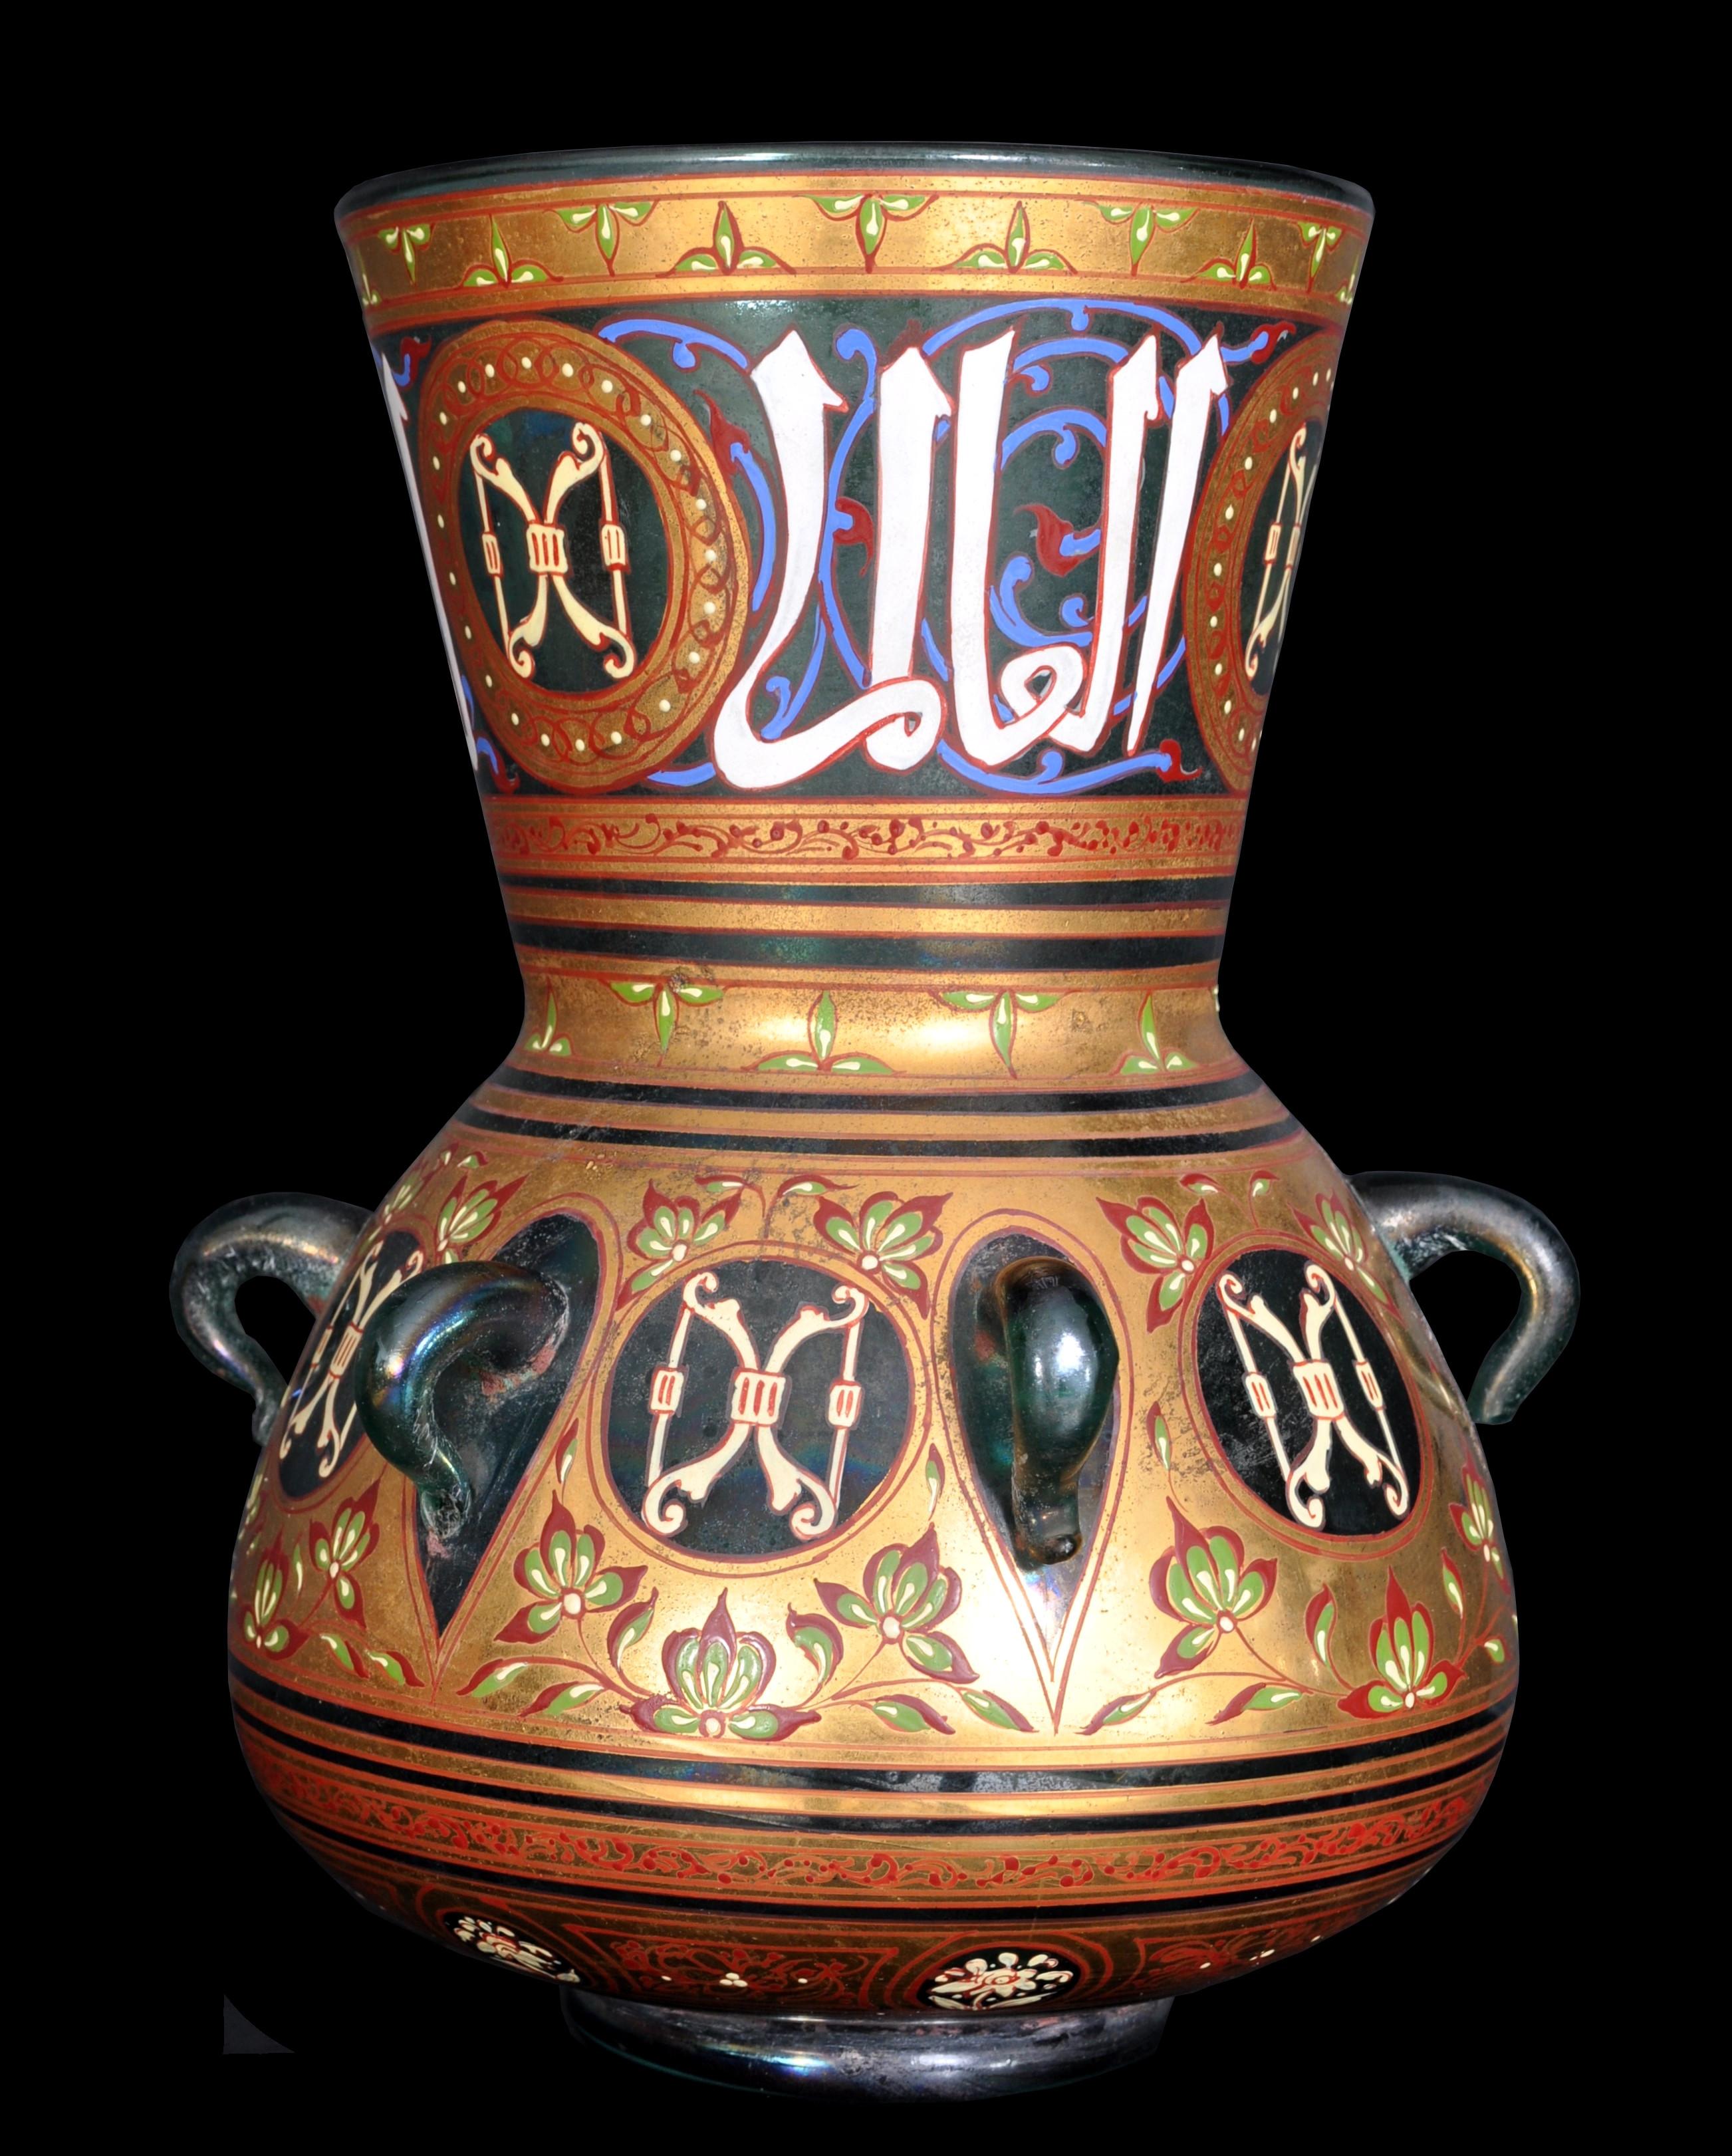 Hand-Painted Antique French Islamic Glass Enamel Gilt Mamluk Revival Mosque Lamp Brocard 1880